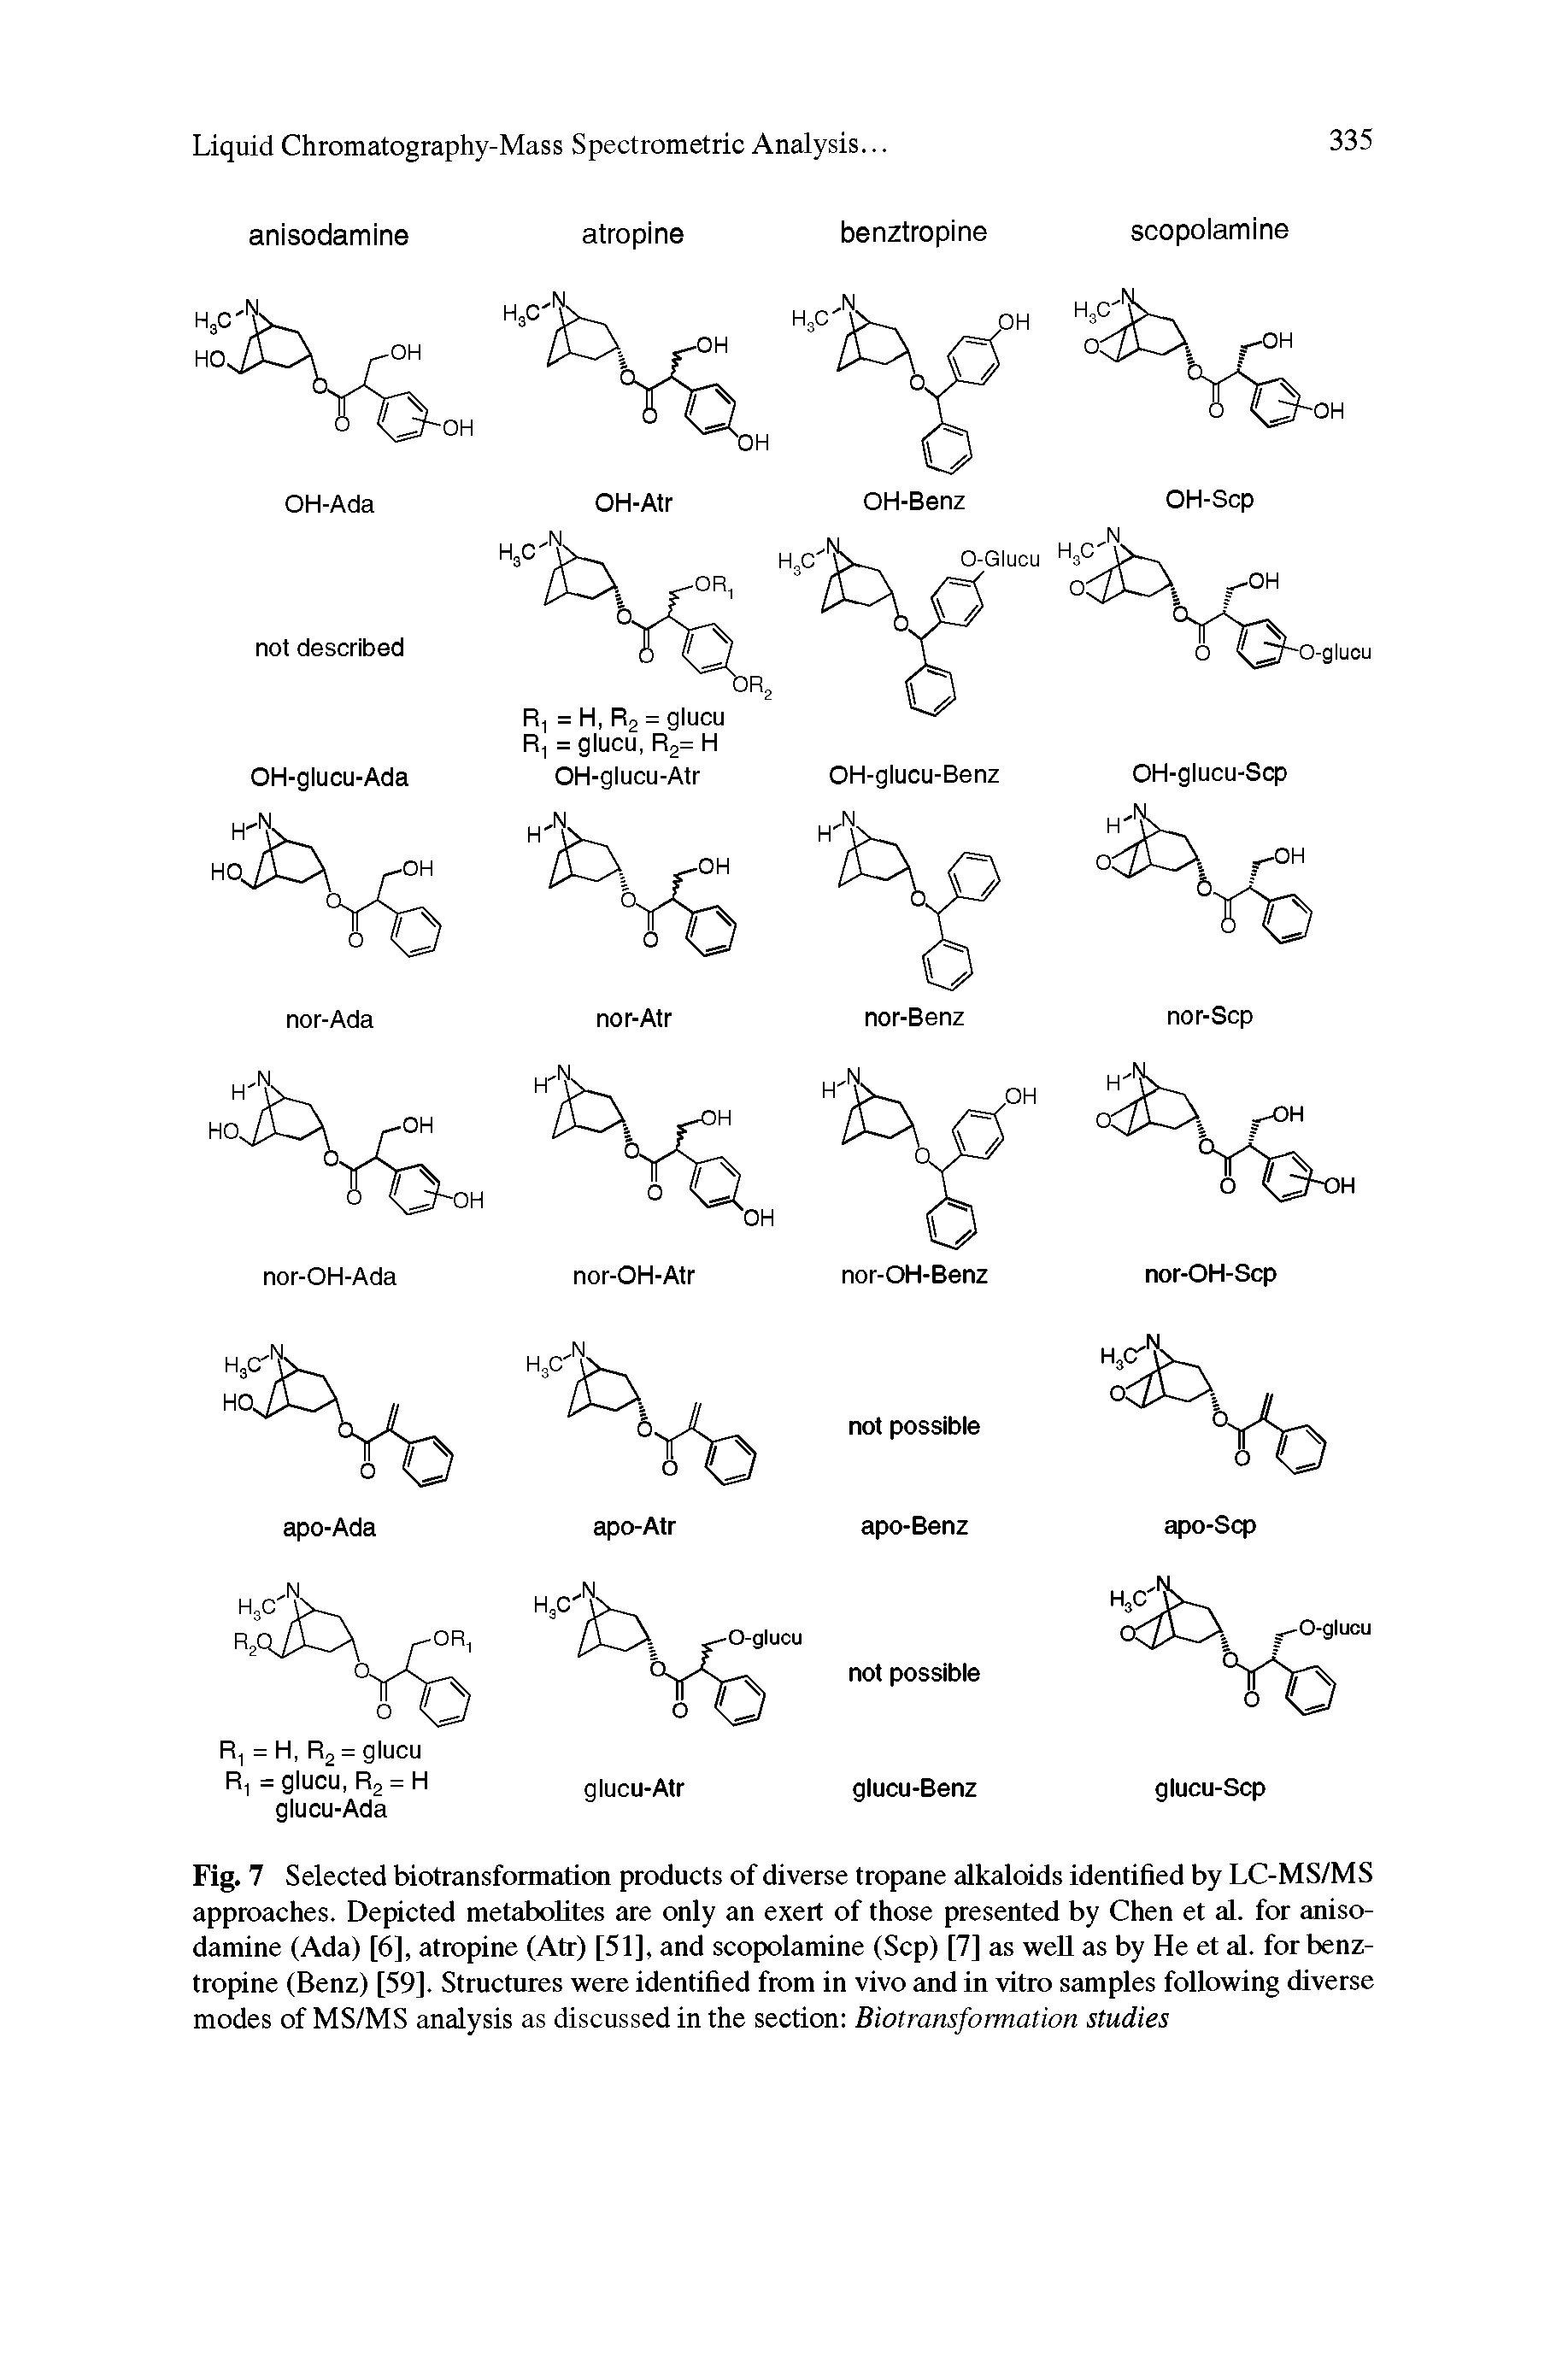 Fig. 7 Selected biotransformation products of diverse tropane alkaloids identified by LC-MS/MS approaches. Depicted metabolites are only an exert of those presented by Chen et al. for anisodamine (Ada) [6], atropine (Atr) [51], and scopolamine (Sep) [7] as well as by He et al. for benztropine (Benz) [59]. Structures were identified from in vivo and in vitro samples following diverse modes of MS/MS analysis as discussed in the section Biotransformation studies...